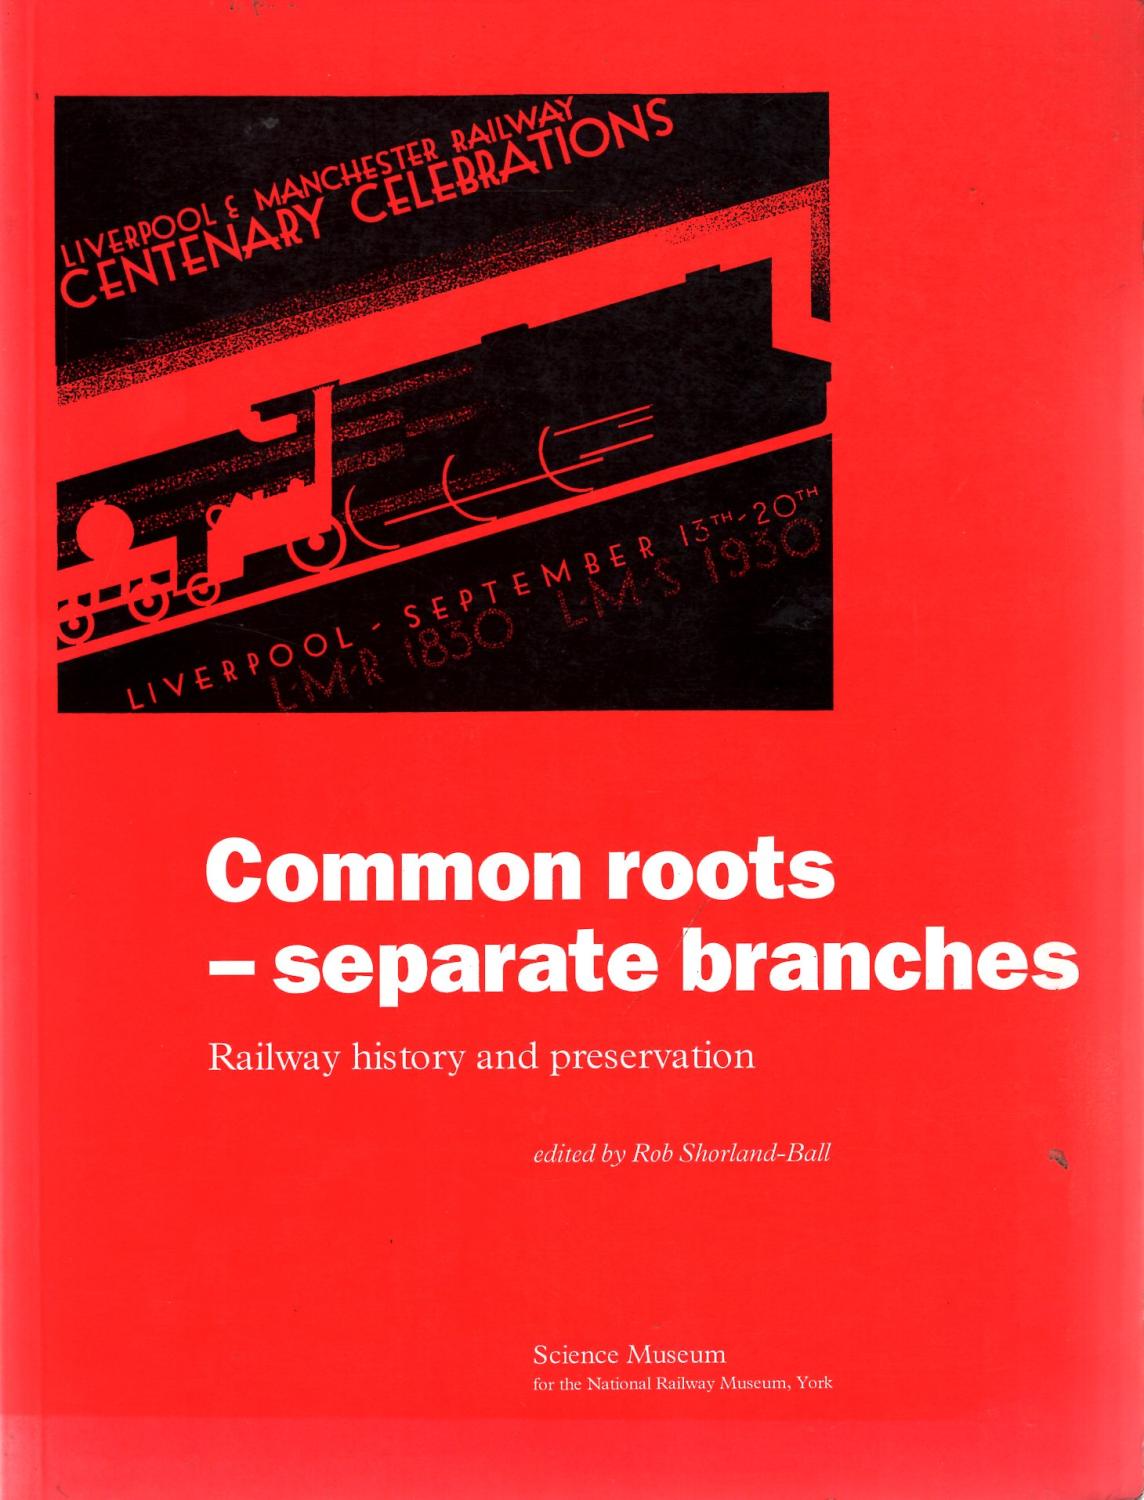 International Symposium on Railway History and Preservation : Common Roots; Separate Branches : Railway History and Preservation, York 1st, 1993 - Shorland-Ball, Rob